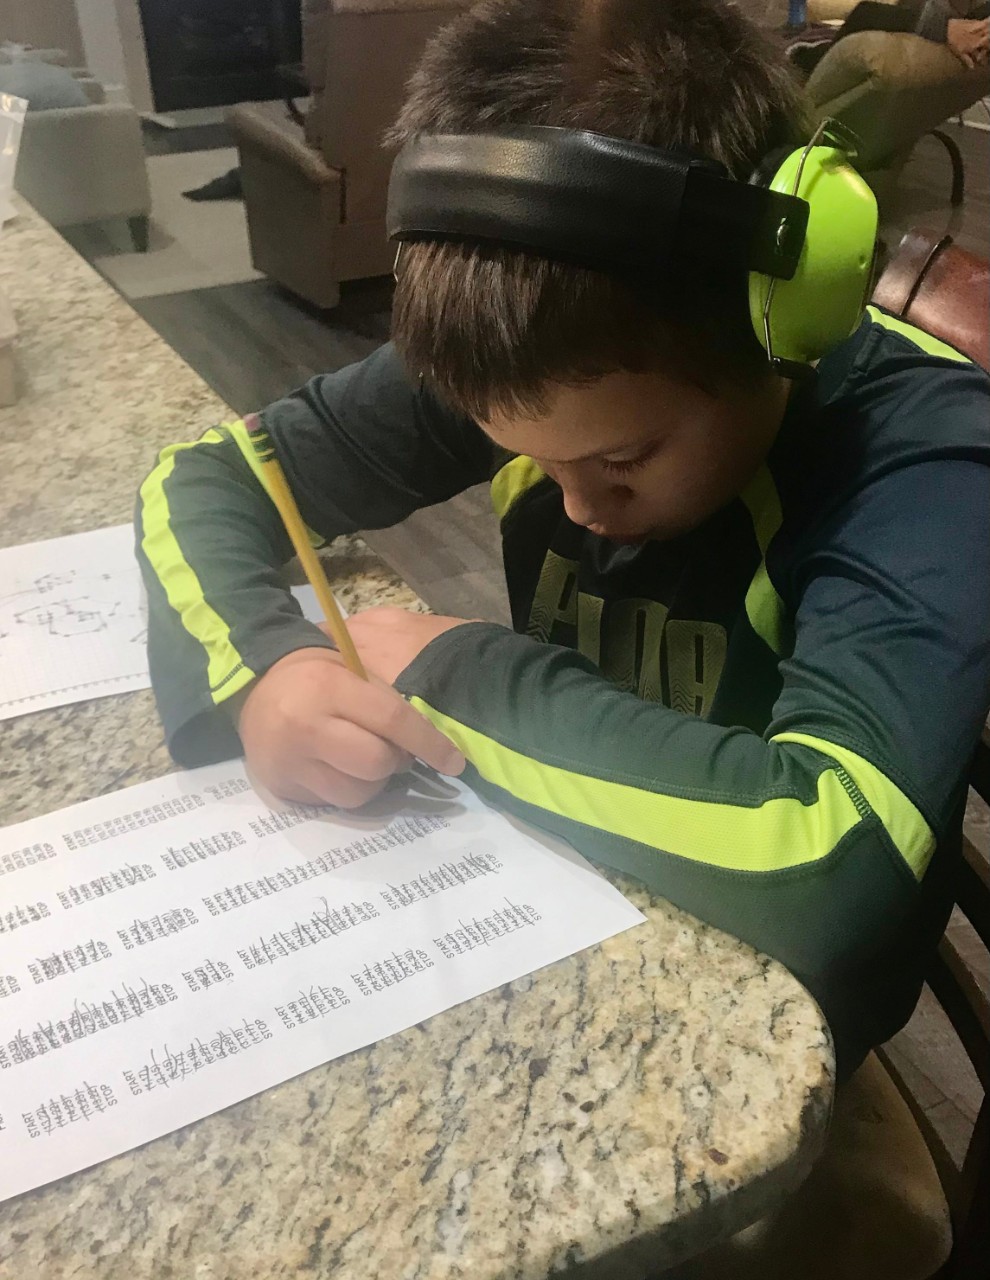 a young boy with brown hair wearing big noise-canceling earphones sits at a table and looks down at his homework intently writing with a pencil. 